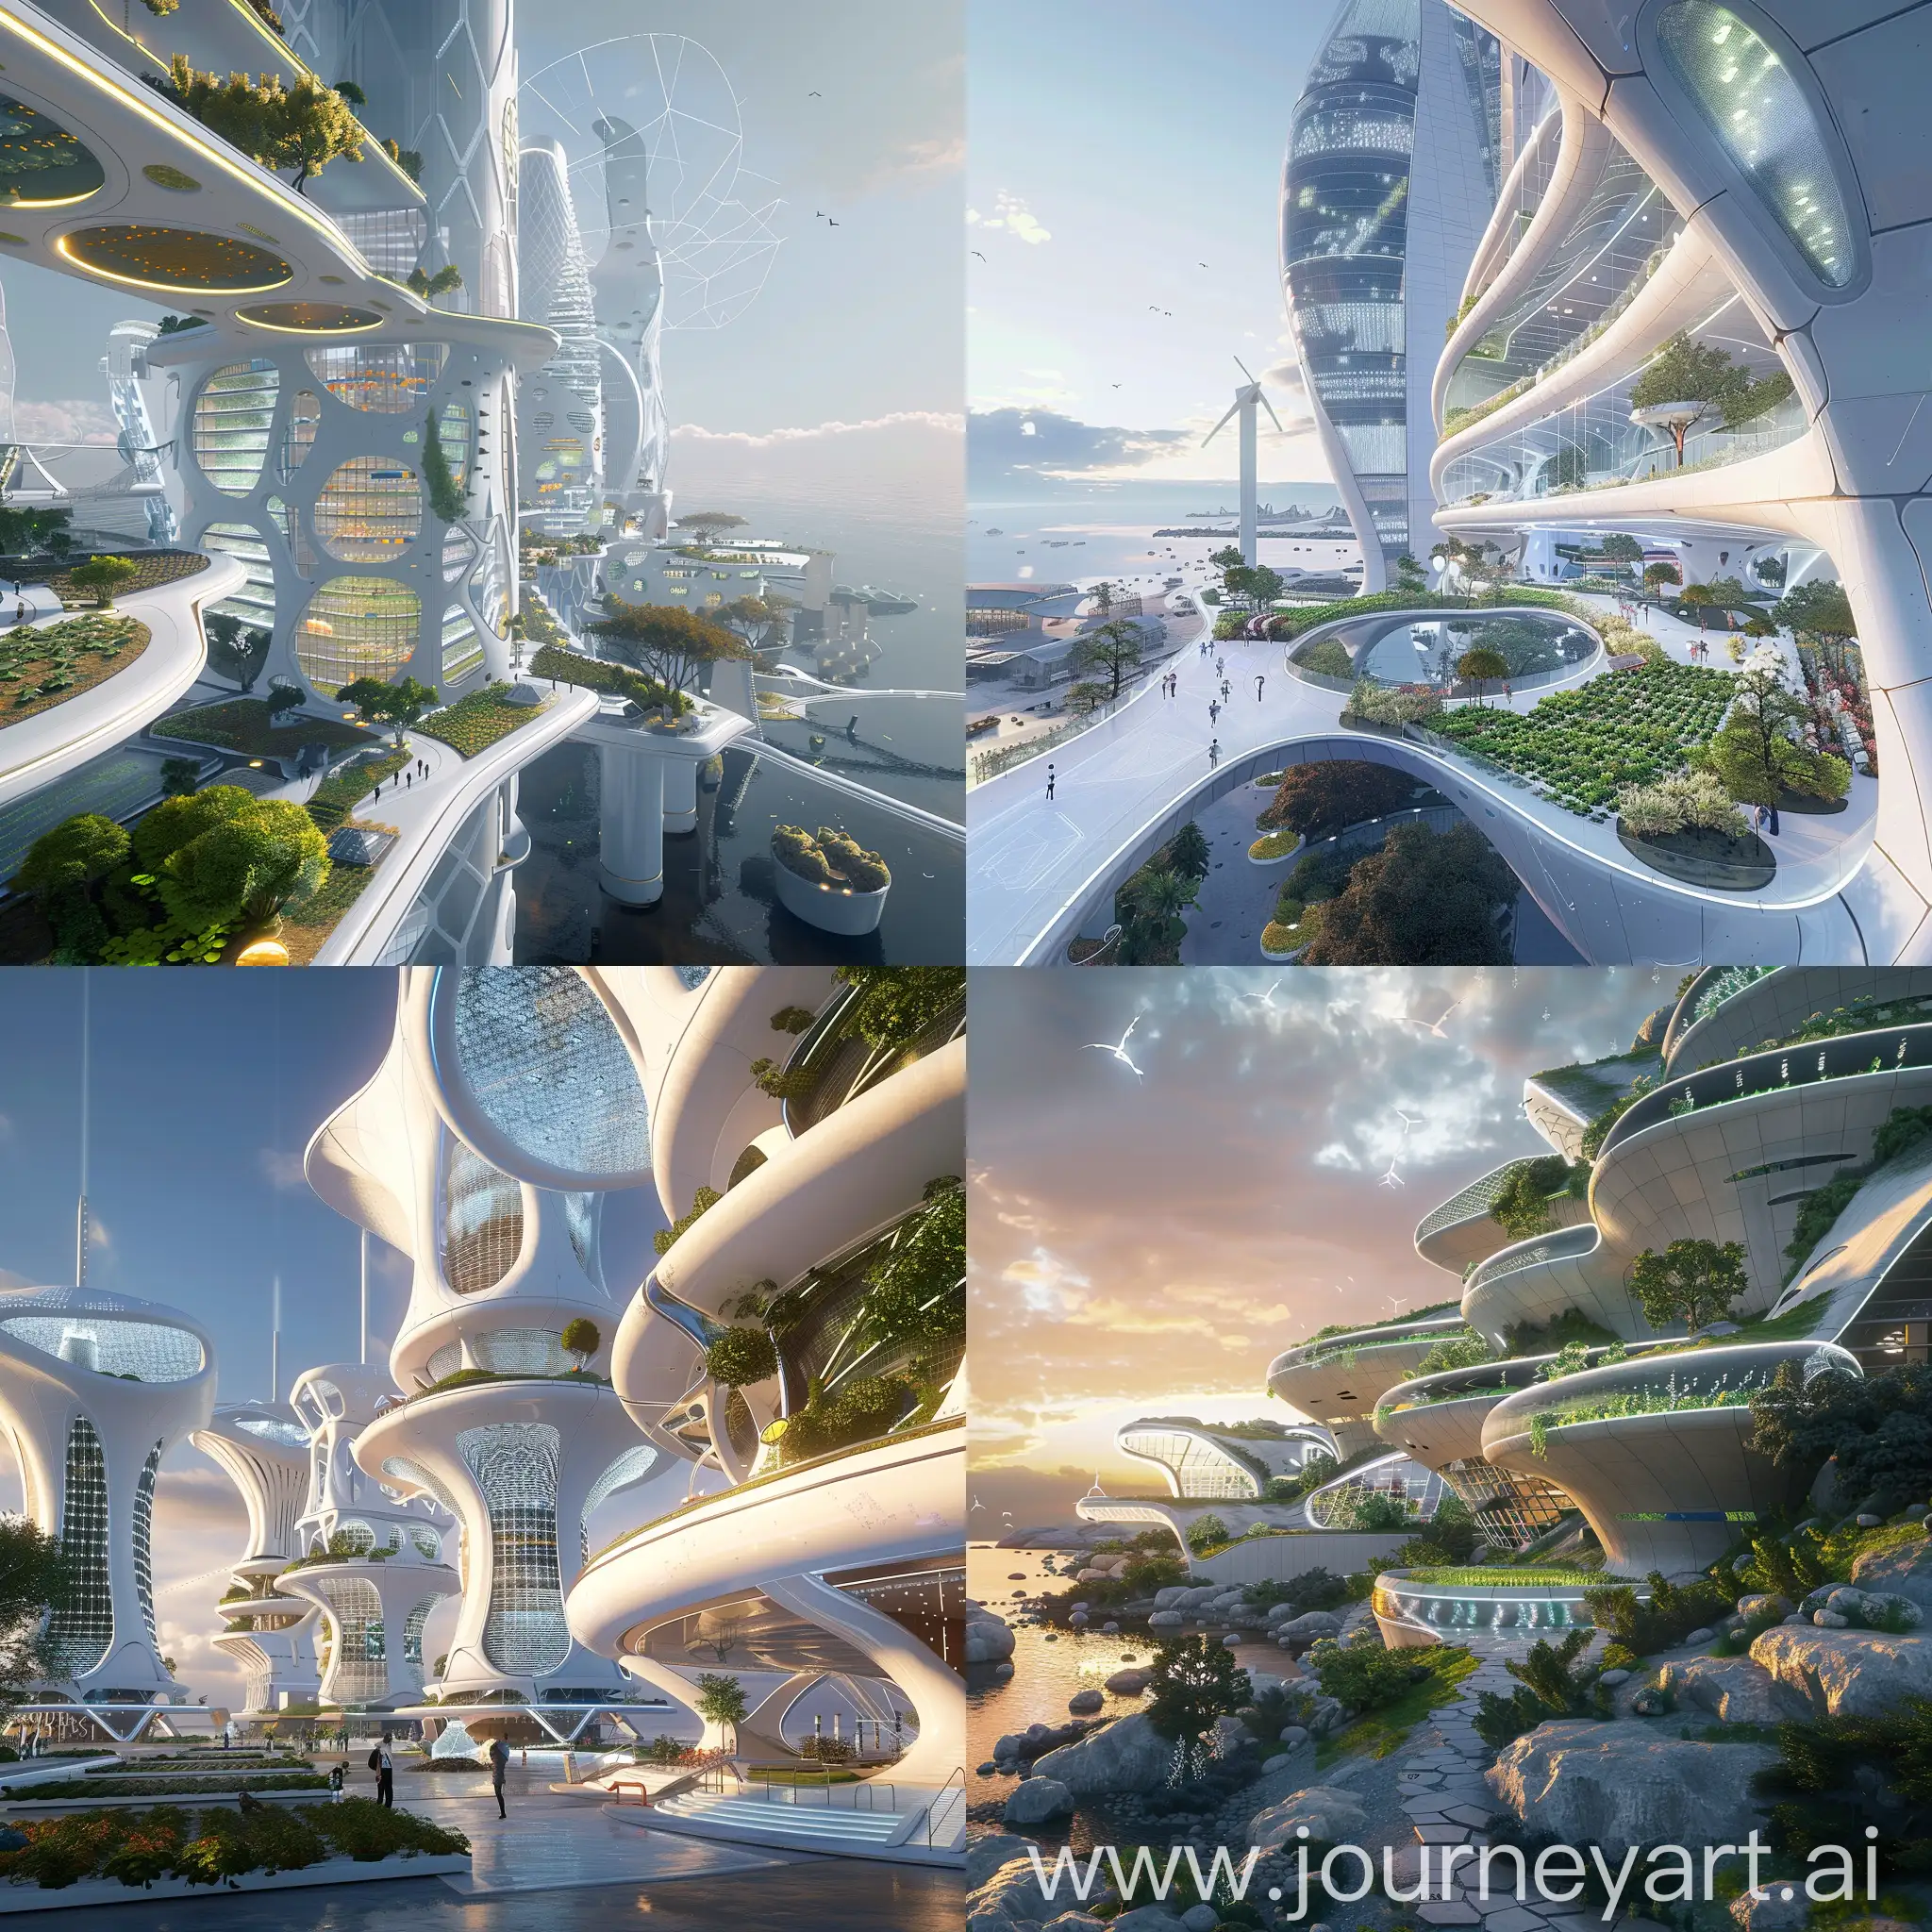 Futuristic Vladivostok, Bioluminescent Walls (inspired by Terraformer Labs), Vertical Hydroponic Farms (inspired by Plenty), Adaptive Climate Control (inspired by Google Nest), Kinetic Energy Harvesting Floors (inspired by Pavegen), Waste-to-Energy Systems (inspired by Tesla Powerwall), Nanofiltration Water Purification (inspired by Xylem), Interactive Public Displays (inspired by Microsoft HoloLens), Smart Delivery Systems (inspired by Amazon), AI-powered Building Management (inspired by IBM Watson), Community Hubs (inspired by WeWork), Living Roofs and Facades (inspired by Green City Solutions), Kinetic Wind Turbines (inspired by Altaeros Energies), Solar Panel Skin (inspired by Tesla Solar Roof), Hydroponic Sky Gardens (inspired by AeroFarms), Smart Street Lighting (inspired by Philips CityTouch), Smart Street Lighting (inspired by Philips CityTouch), Weather-Responsive Facades (inspired by NEXT Architects), Public Observation Decks with AR Overlays (inspired by Microsoft), Networked Pneumatic Waste Collection Systems (inspired by Evac), Bio-receptive Building Materials (inspired by Biohm), unreal engine 5 --stylize 1000